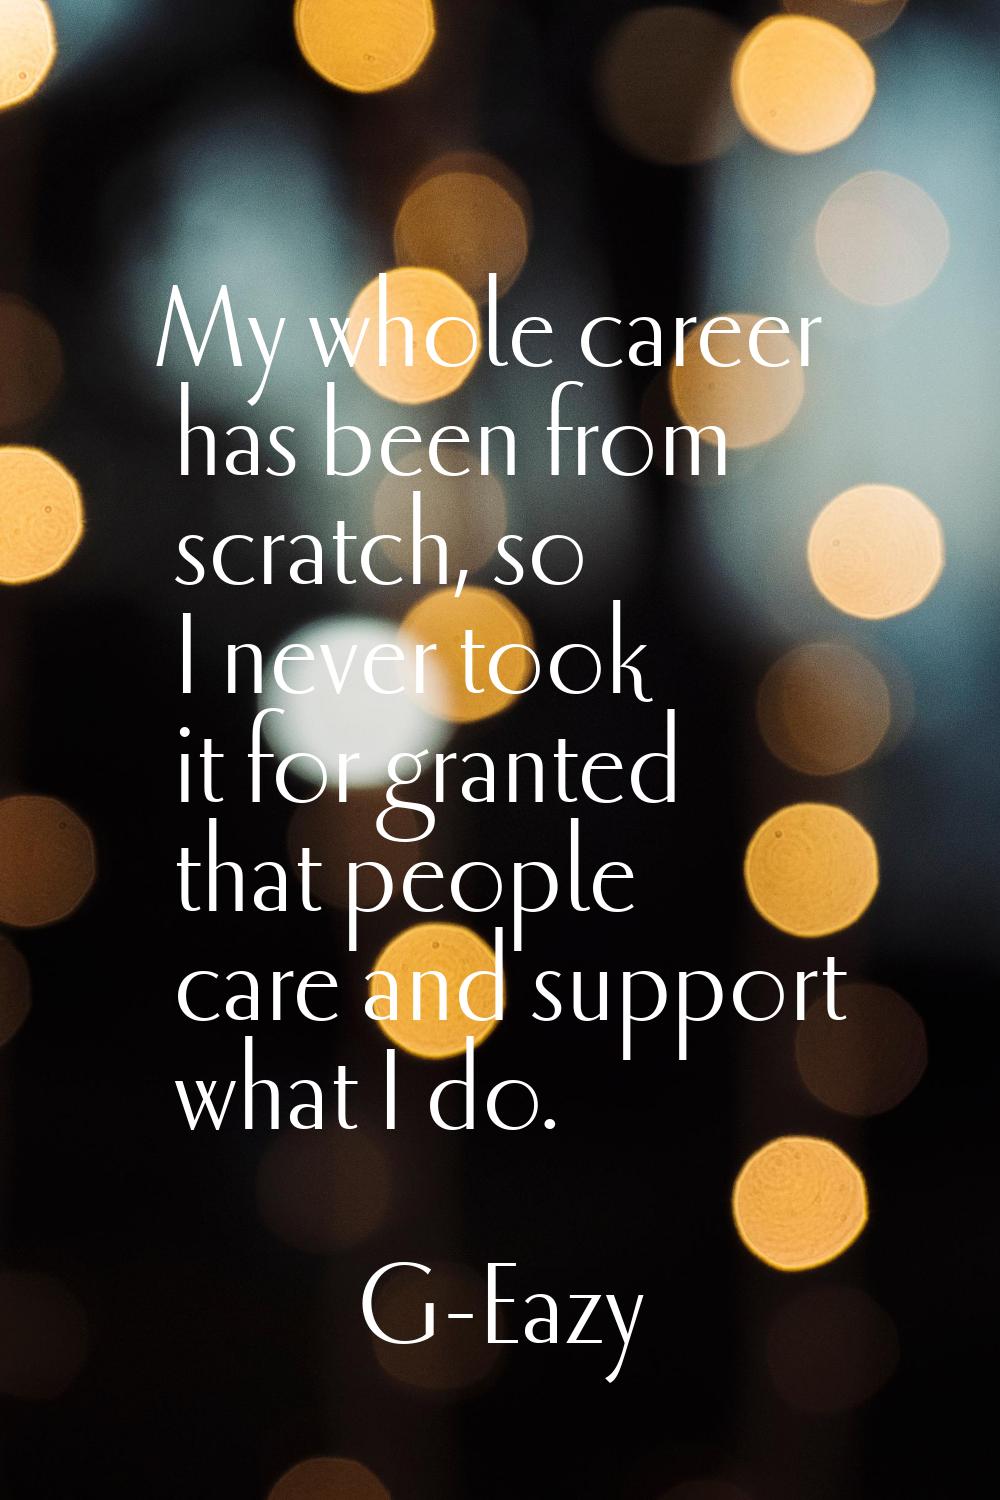 My whole career has been from scratch, so I never took it for granted that people care and support 